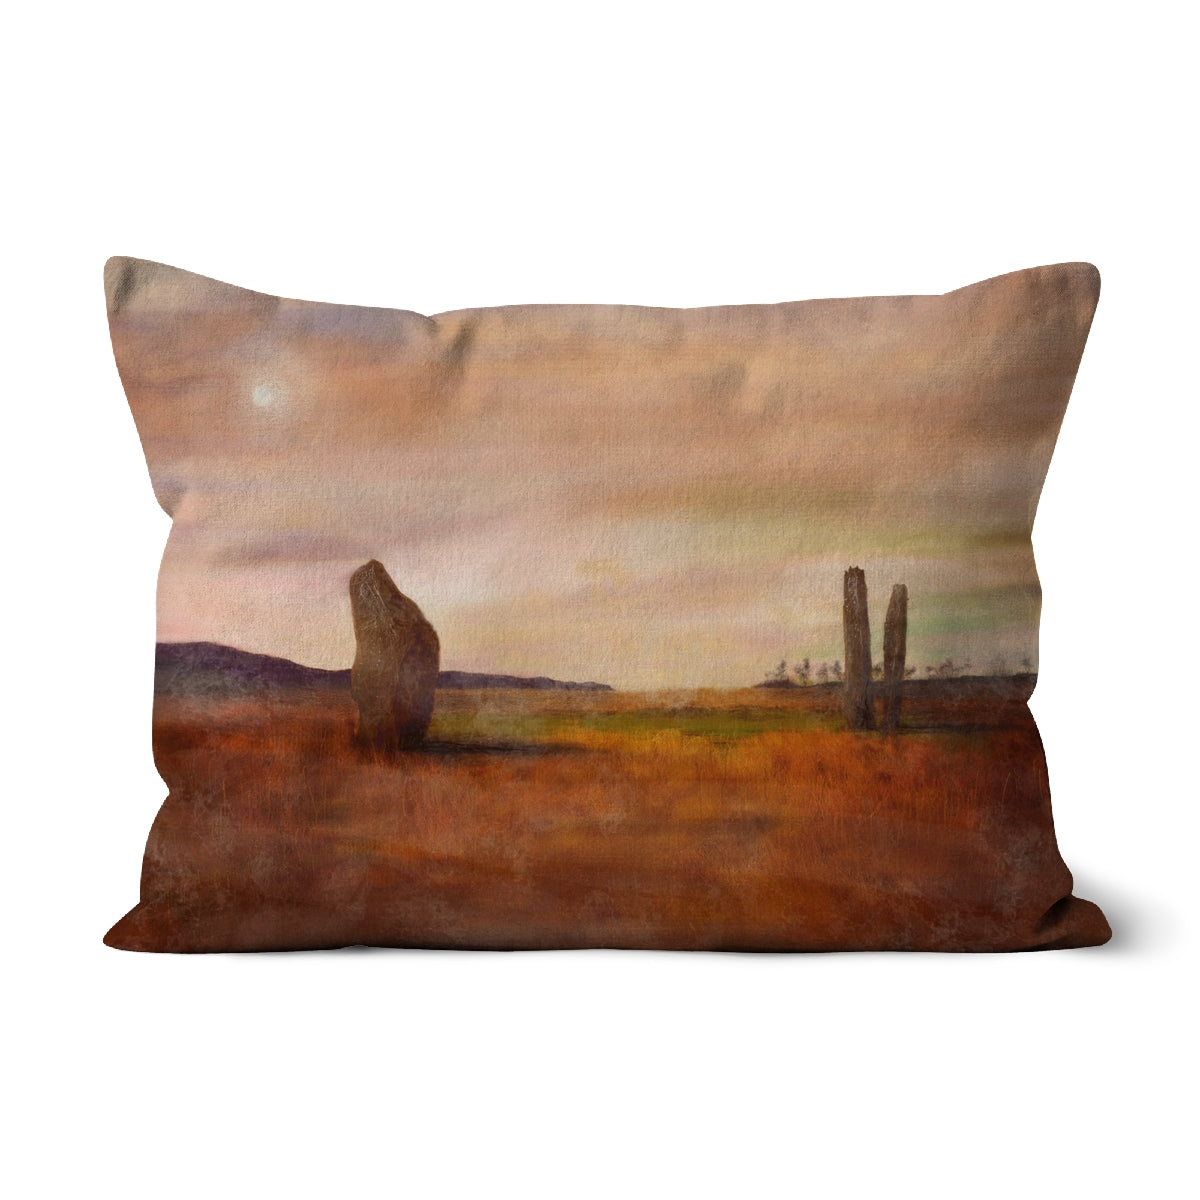 Machrie Moor Arran Art Gifts Cushion-Cushions-Arran Art Gallery-Faux Suede-19"x13"-Paintings, Prints, Homeware, Art Gifts From Scotland By Scottish Artist Kevin Hunter